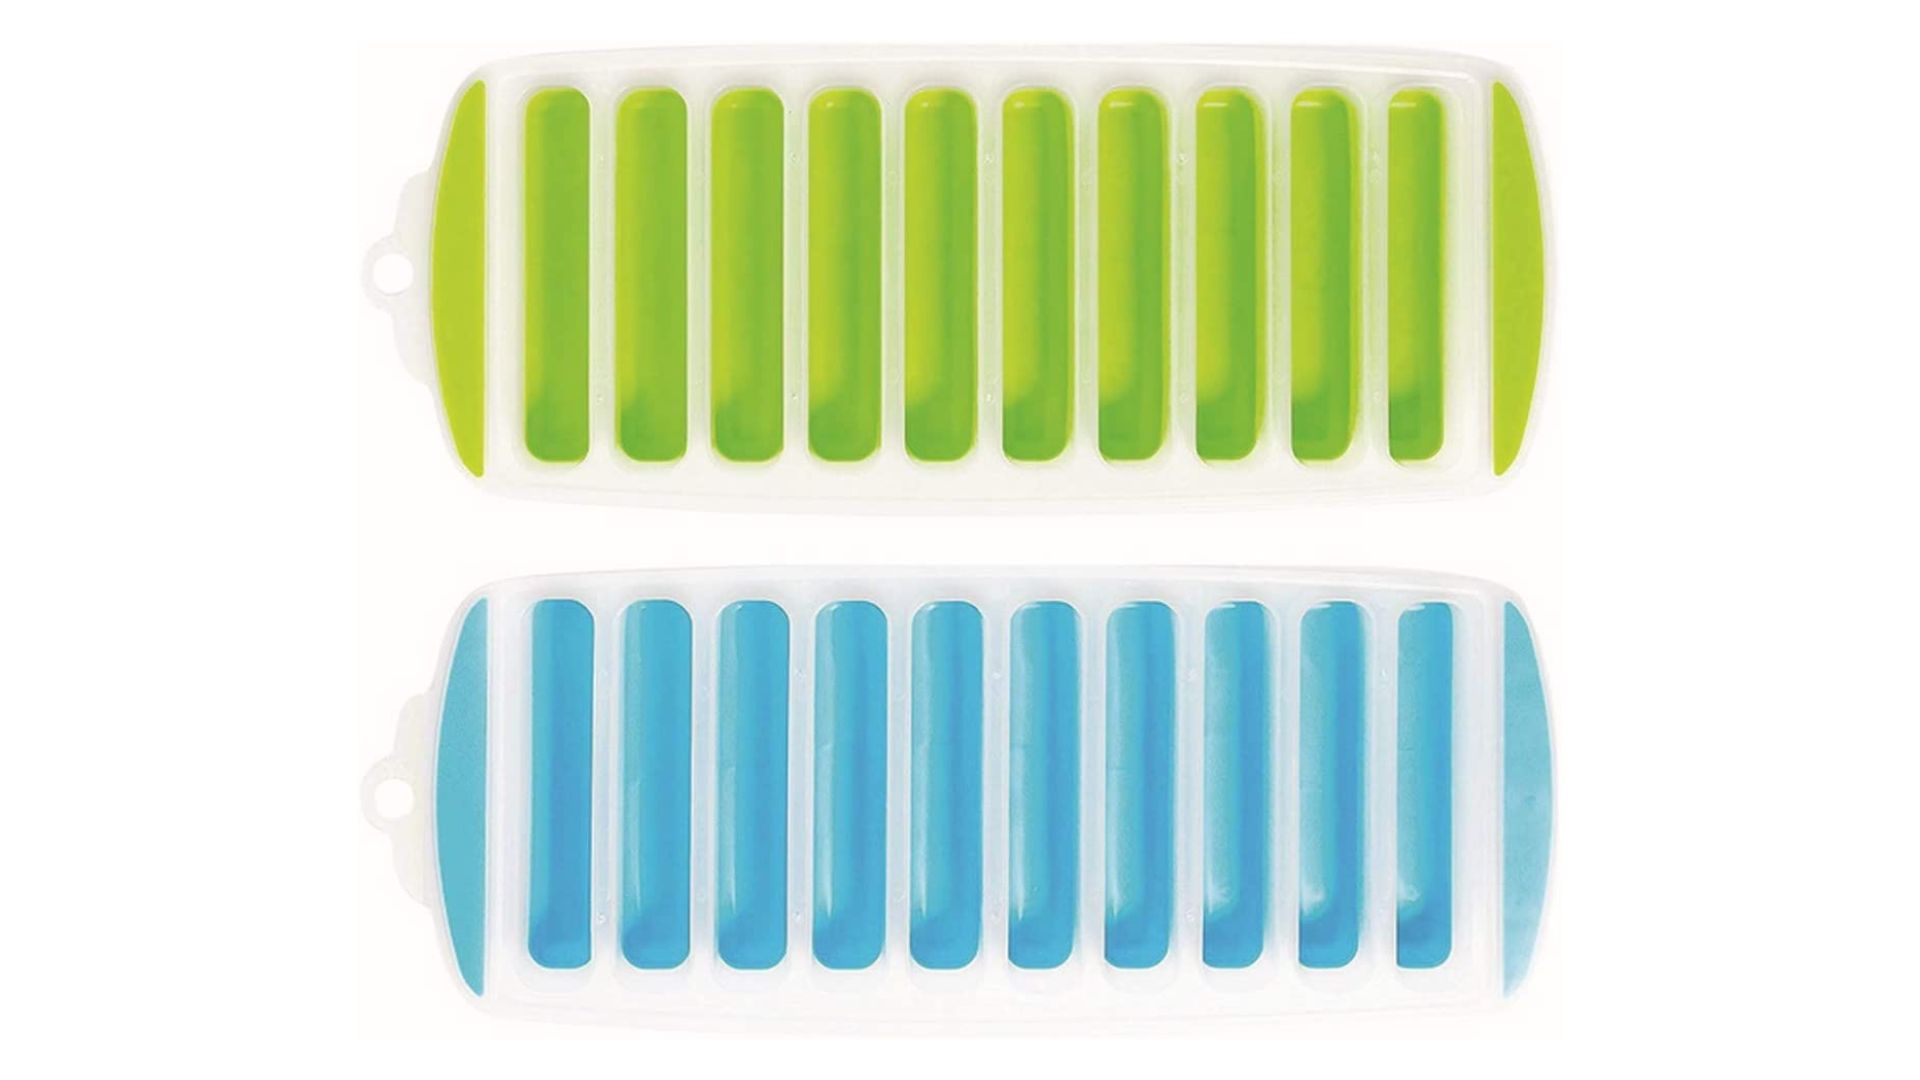 Kitchen cooking gadgets: ice tray